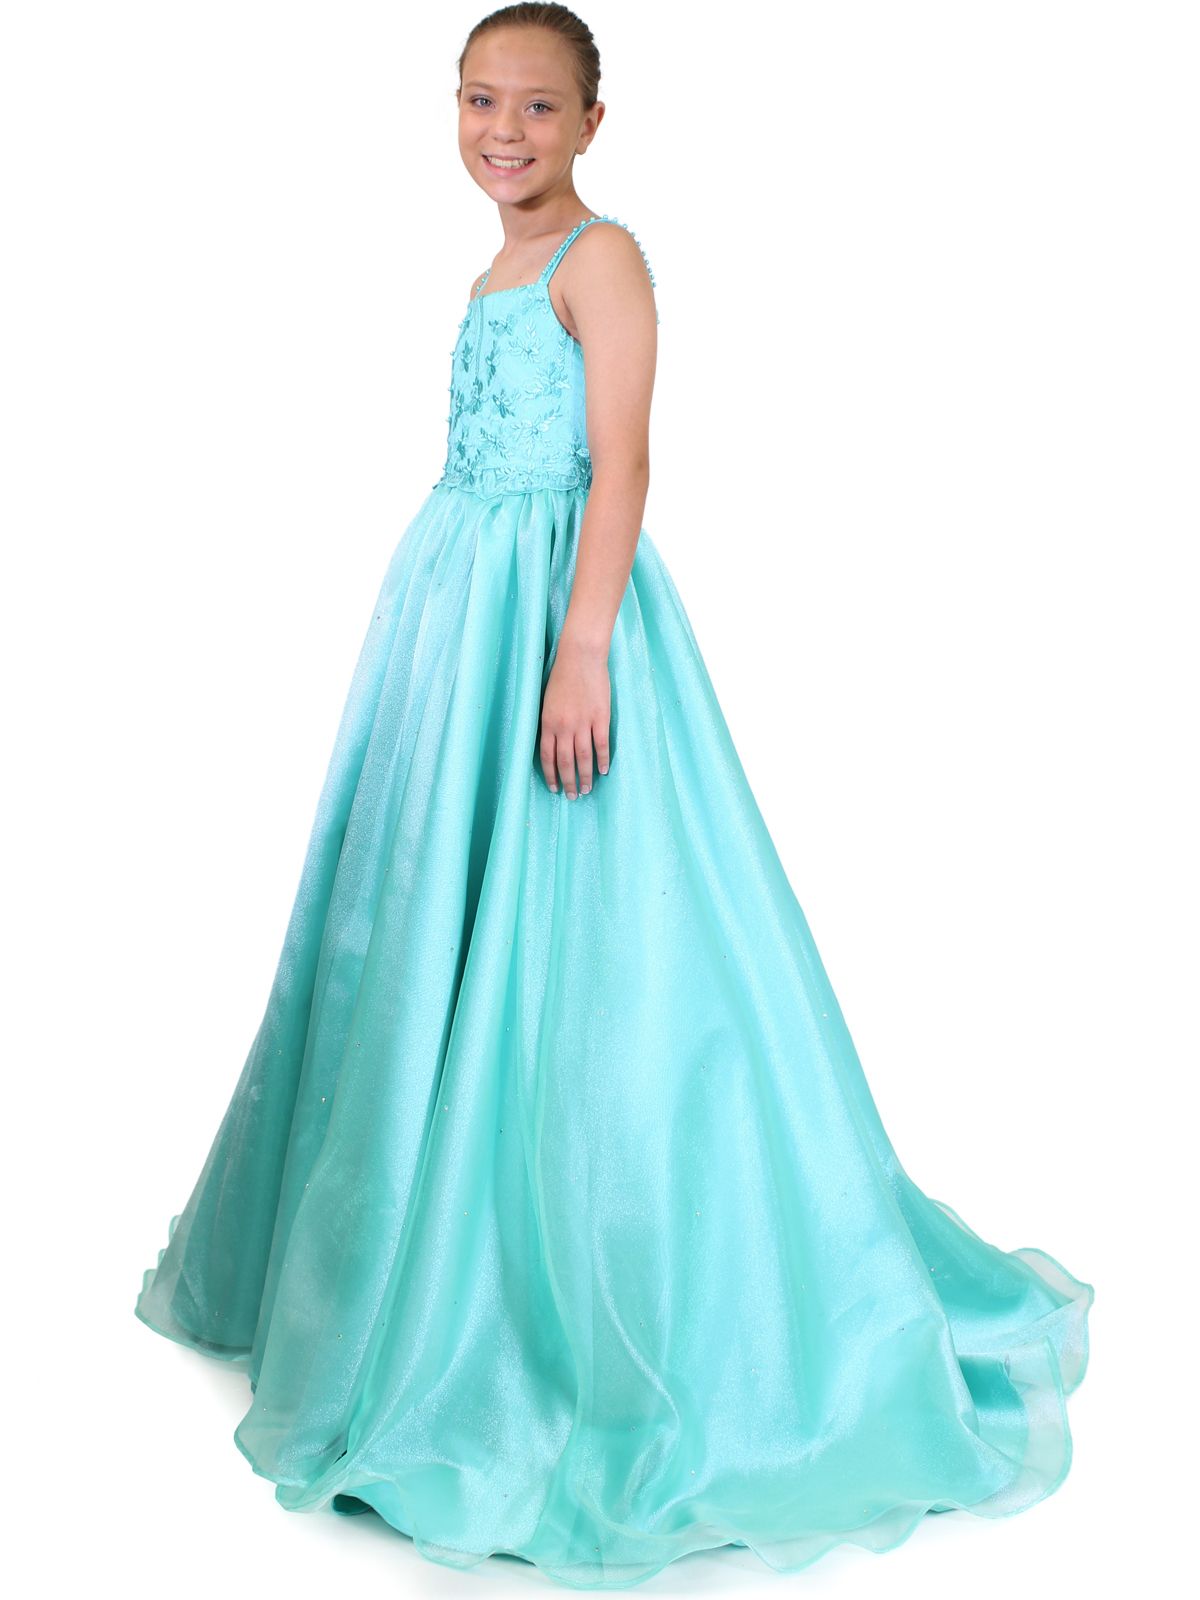 3-12 Years Girls Lace Long Dress Princess Birthday Wedding Bridesmaid Party  Gown | eBay